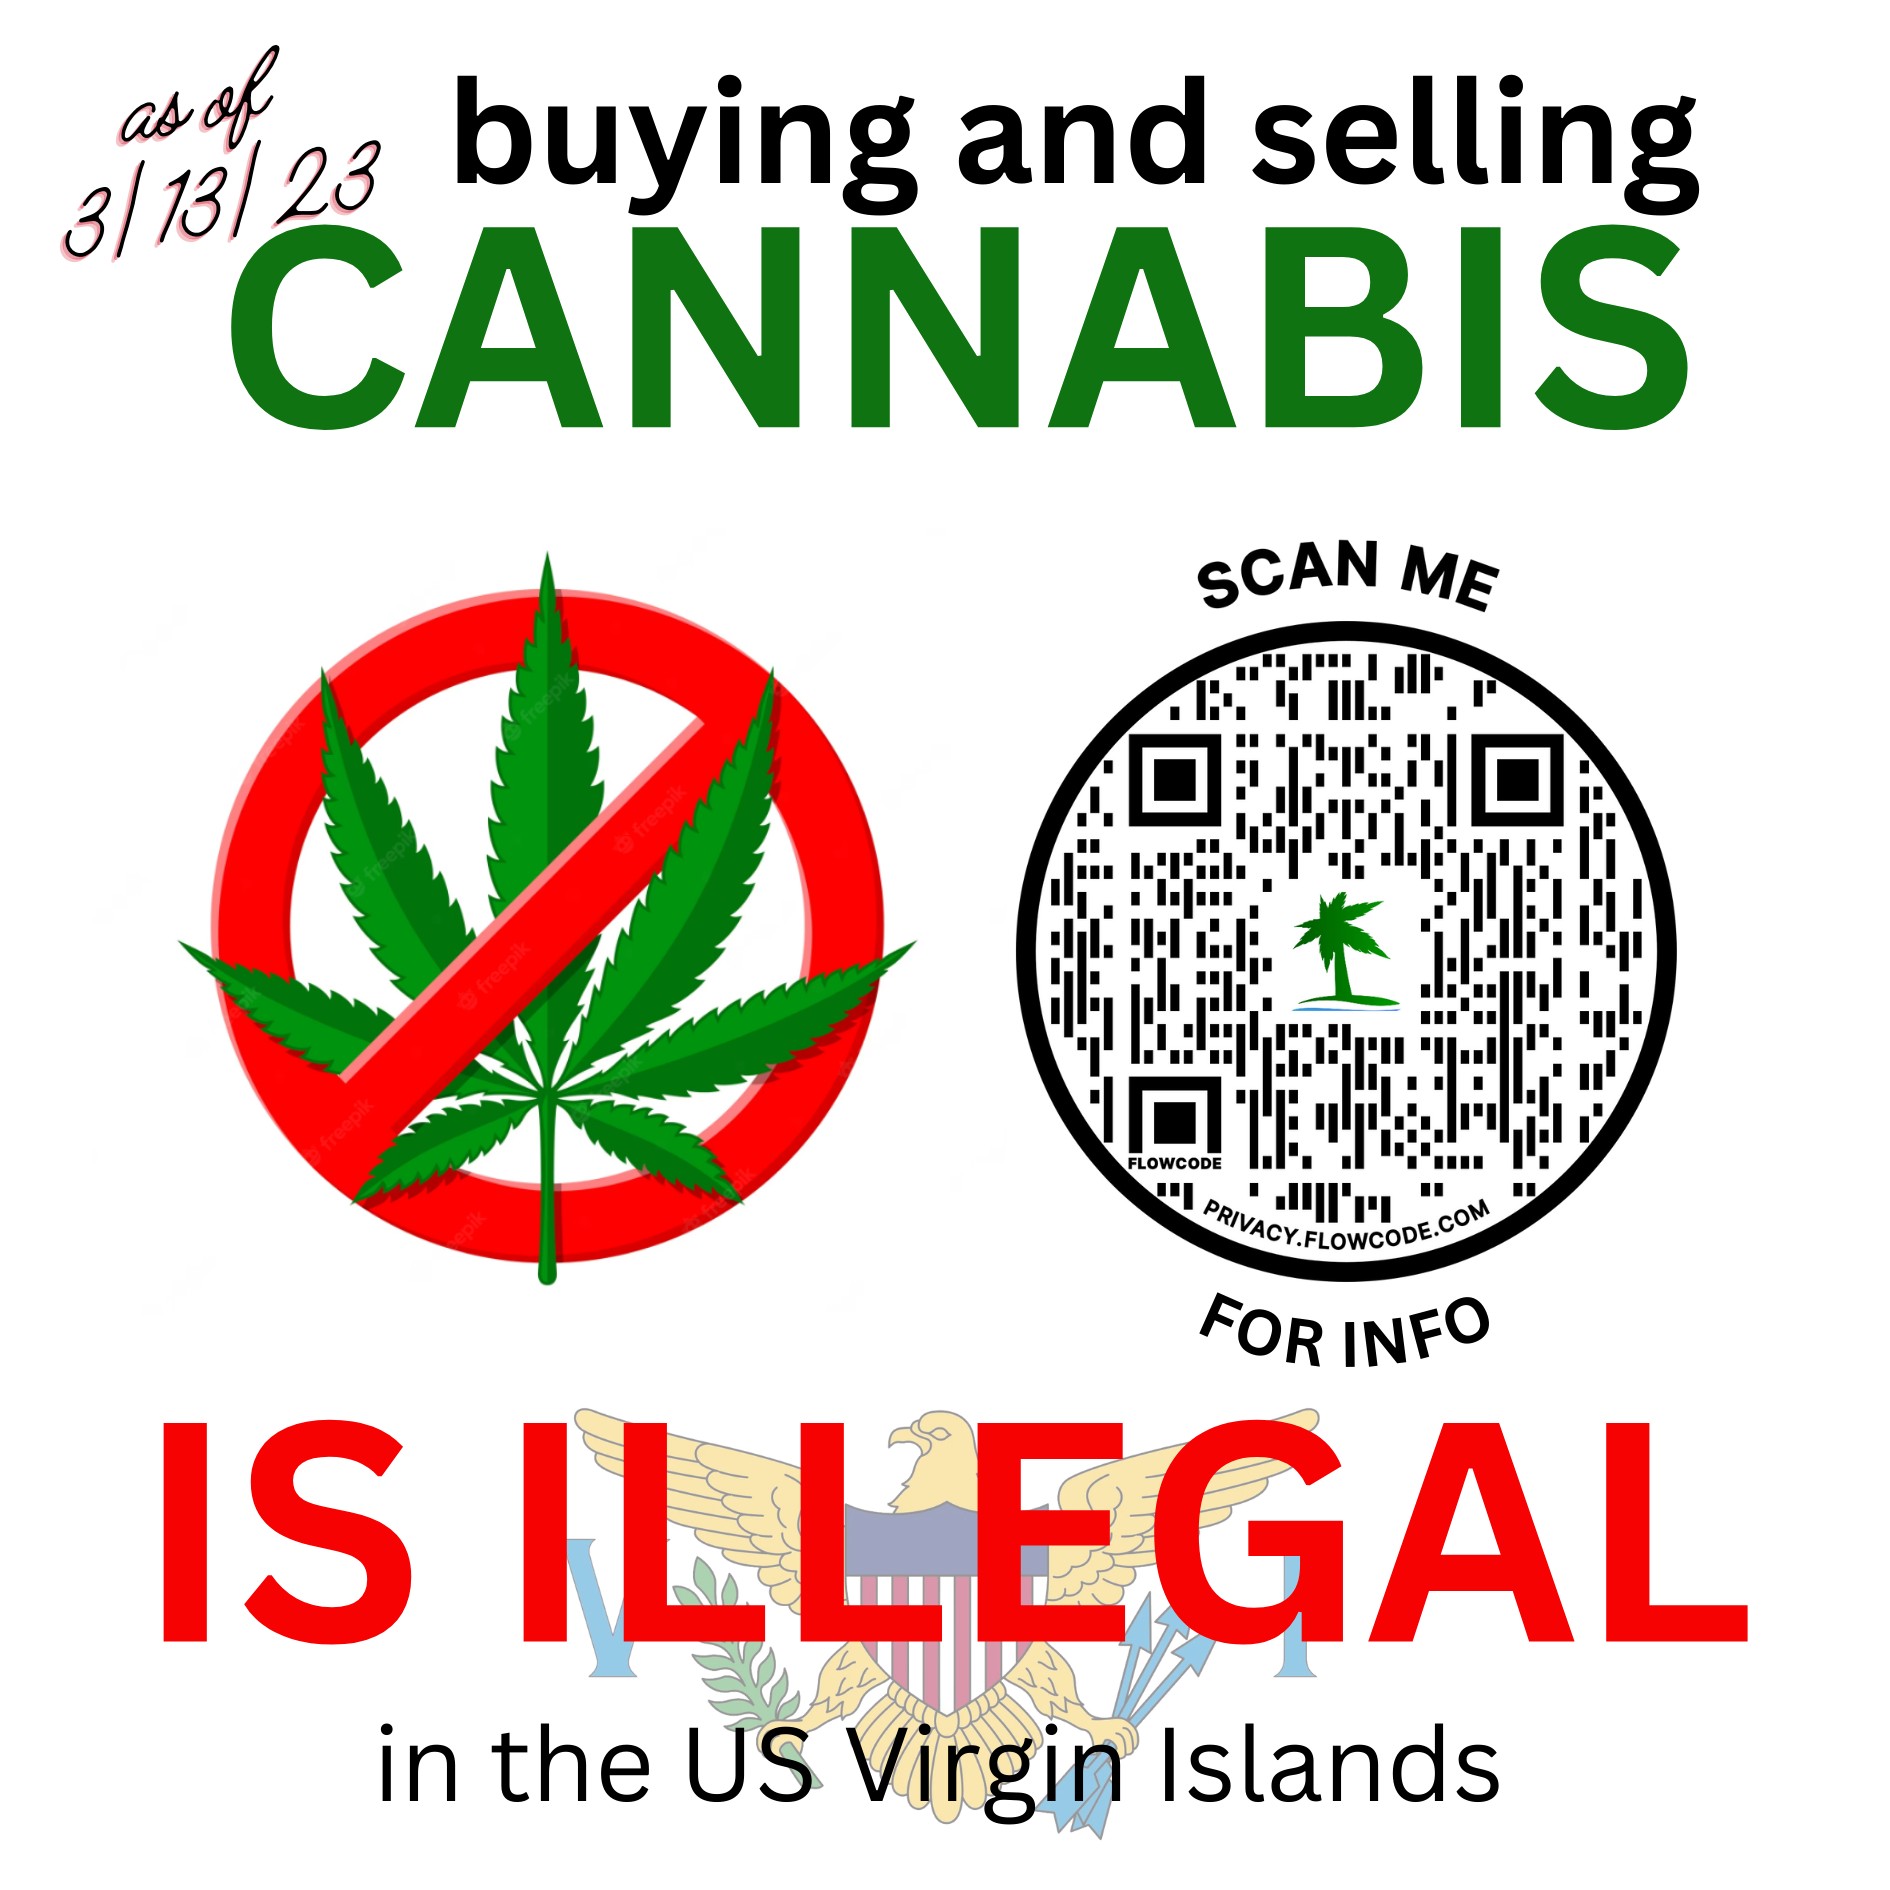 Cannabis is still illegal to purchase and sell in The US Virgin Islands!